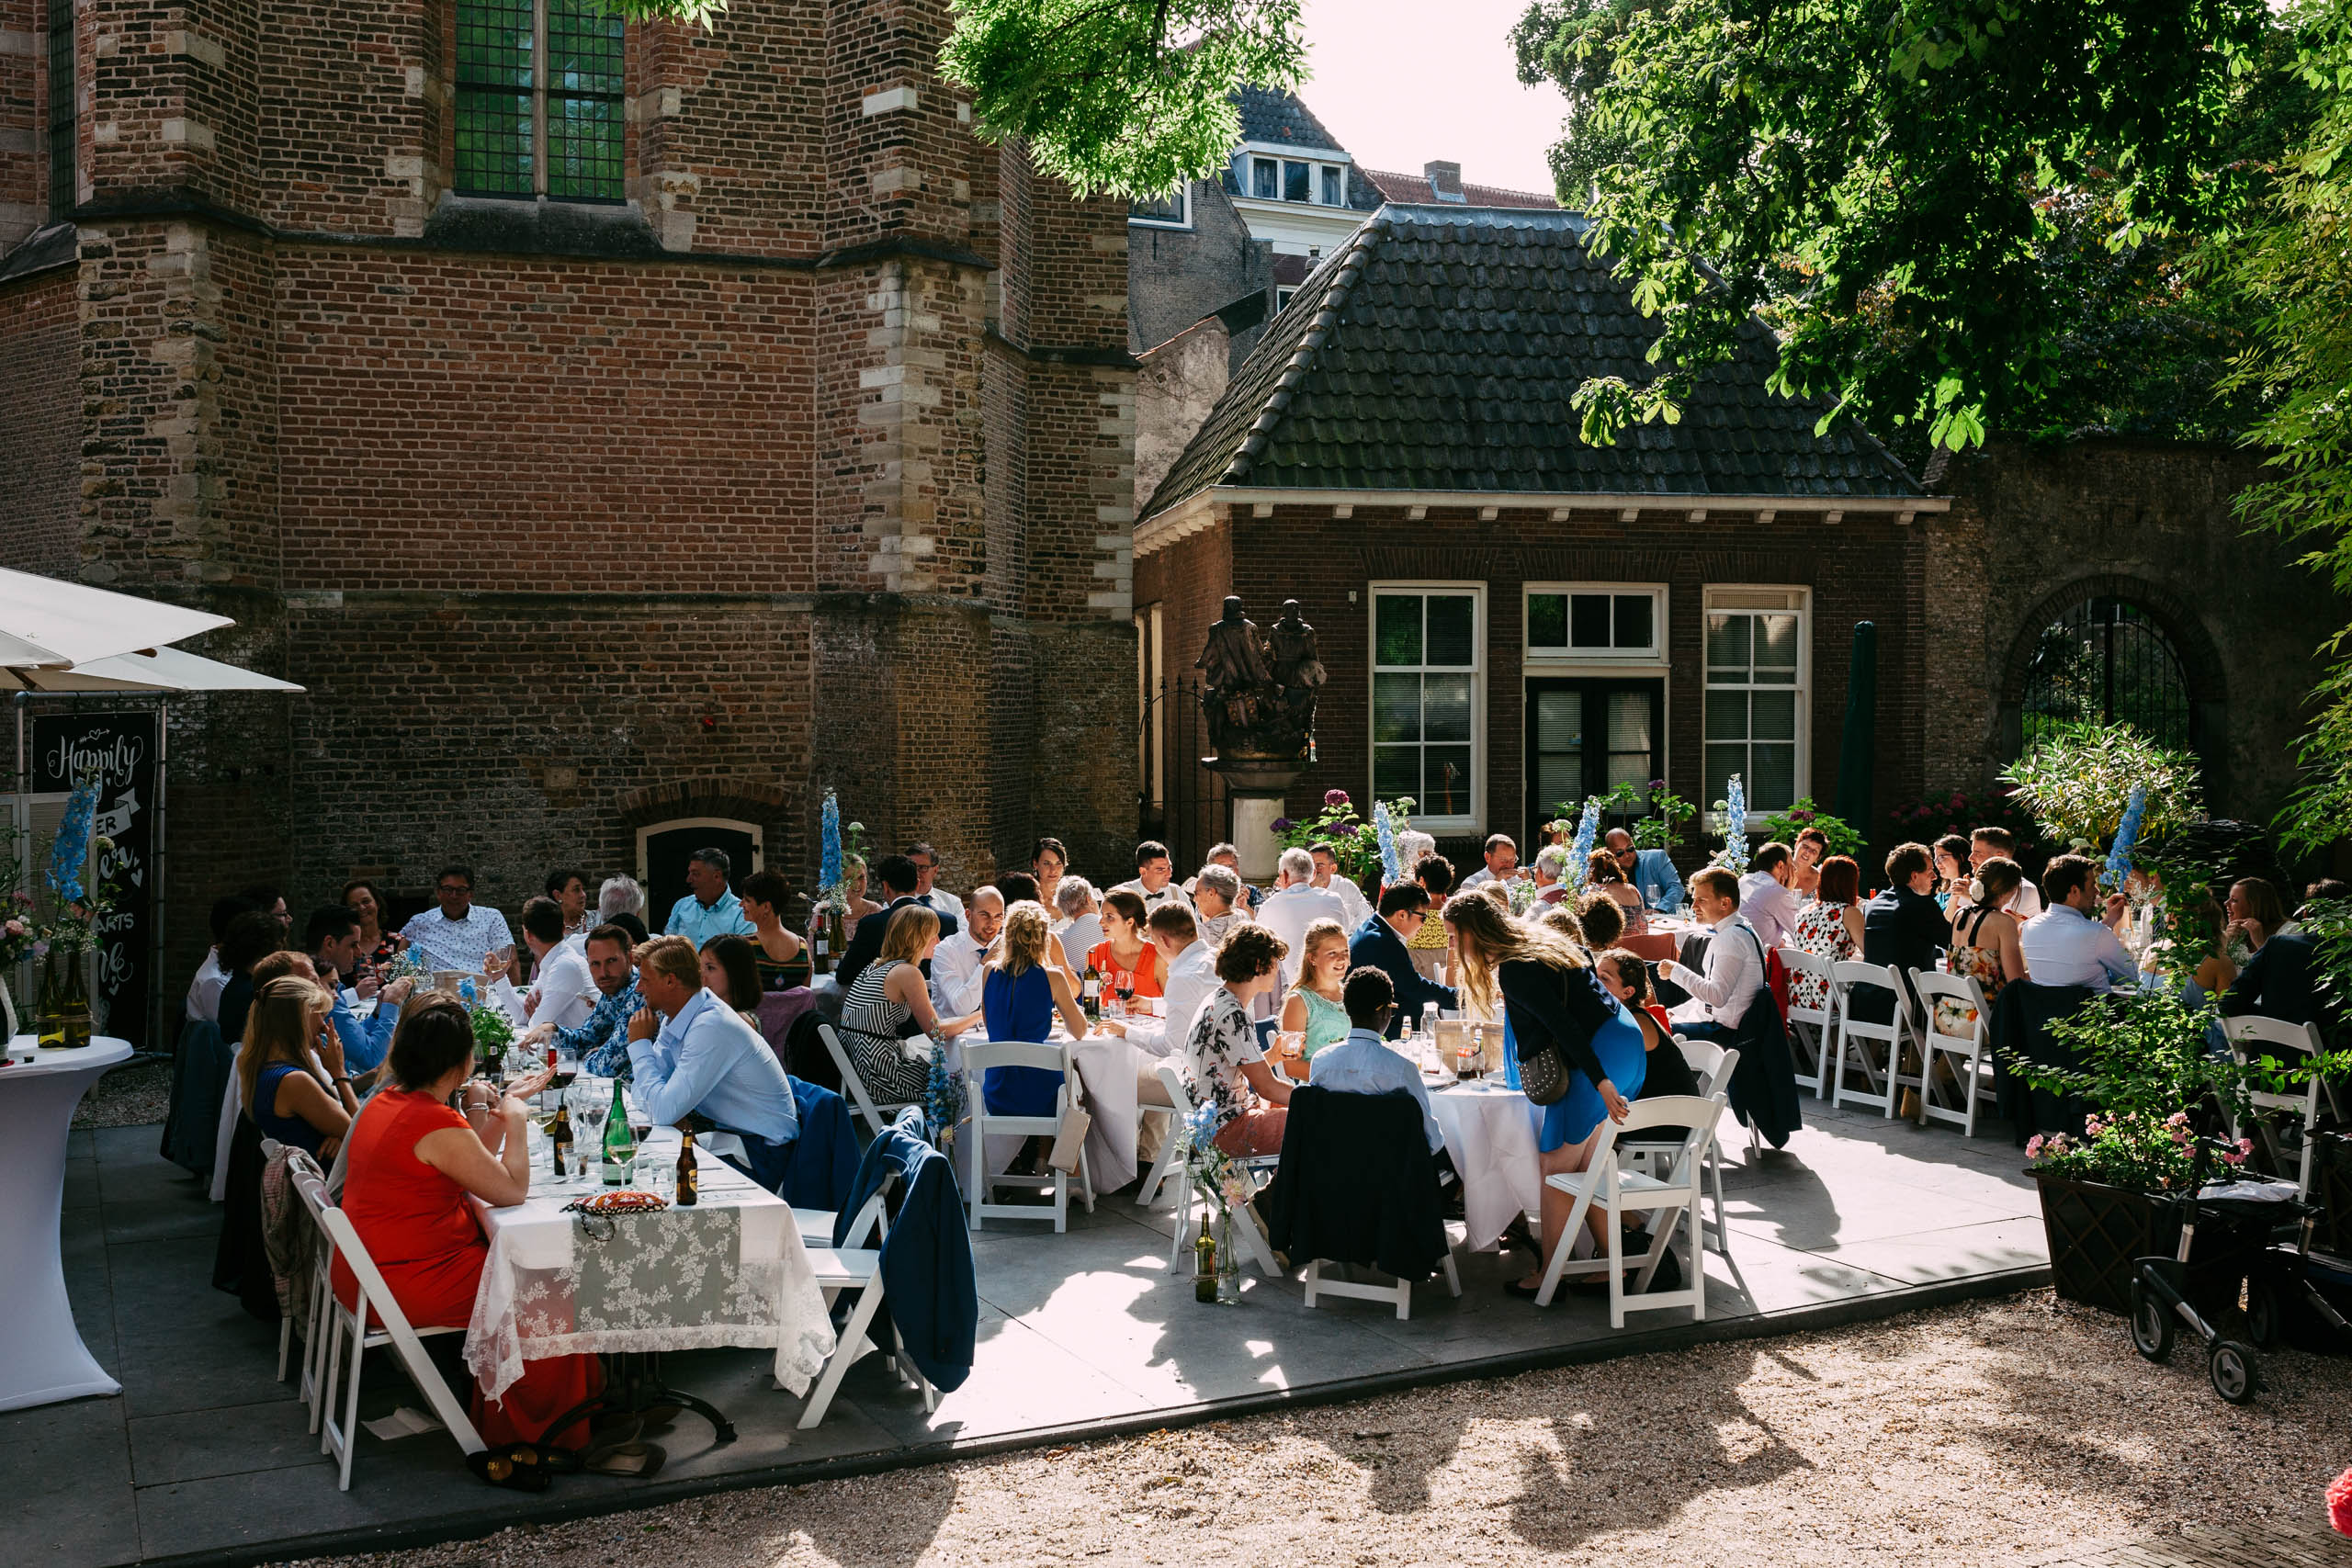 A large group of people sit at tables in a courtyard, celebrating a joyous wedding.